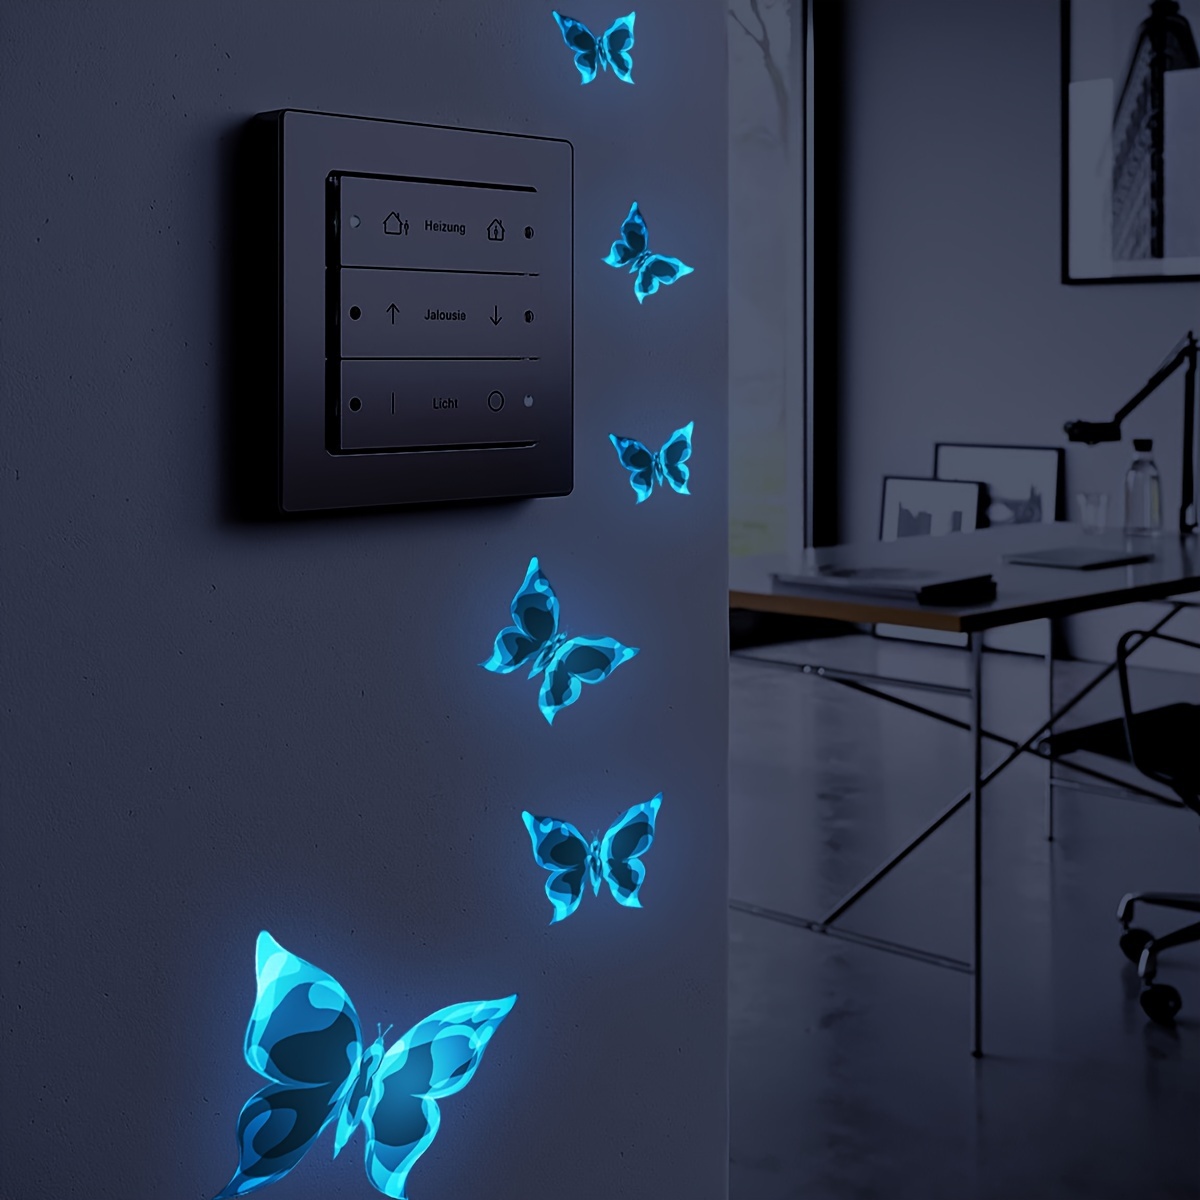 

1set/6 Butterflies, Stickers, Glowing In The Dark, Suitable For Living Room, Bedroom, Background Wall, Wall Decoration, Home Decoration